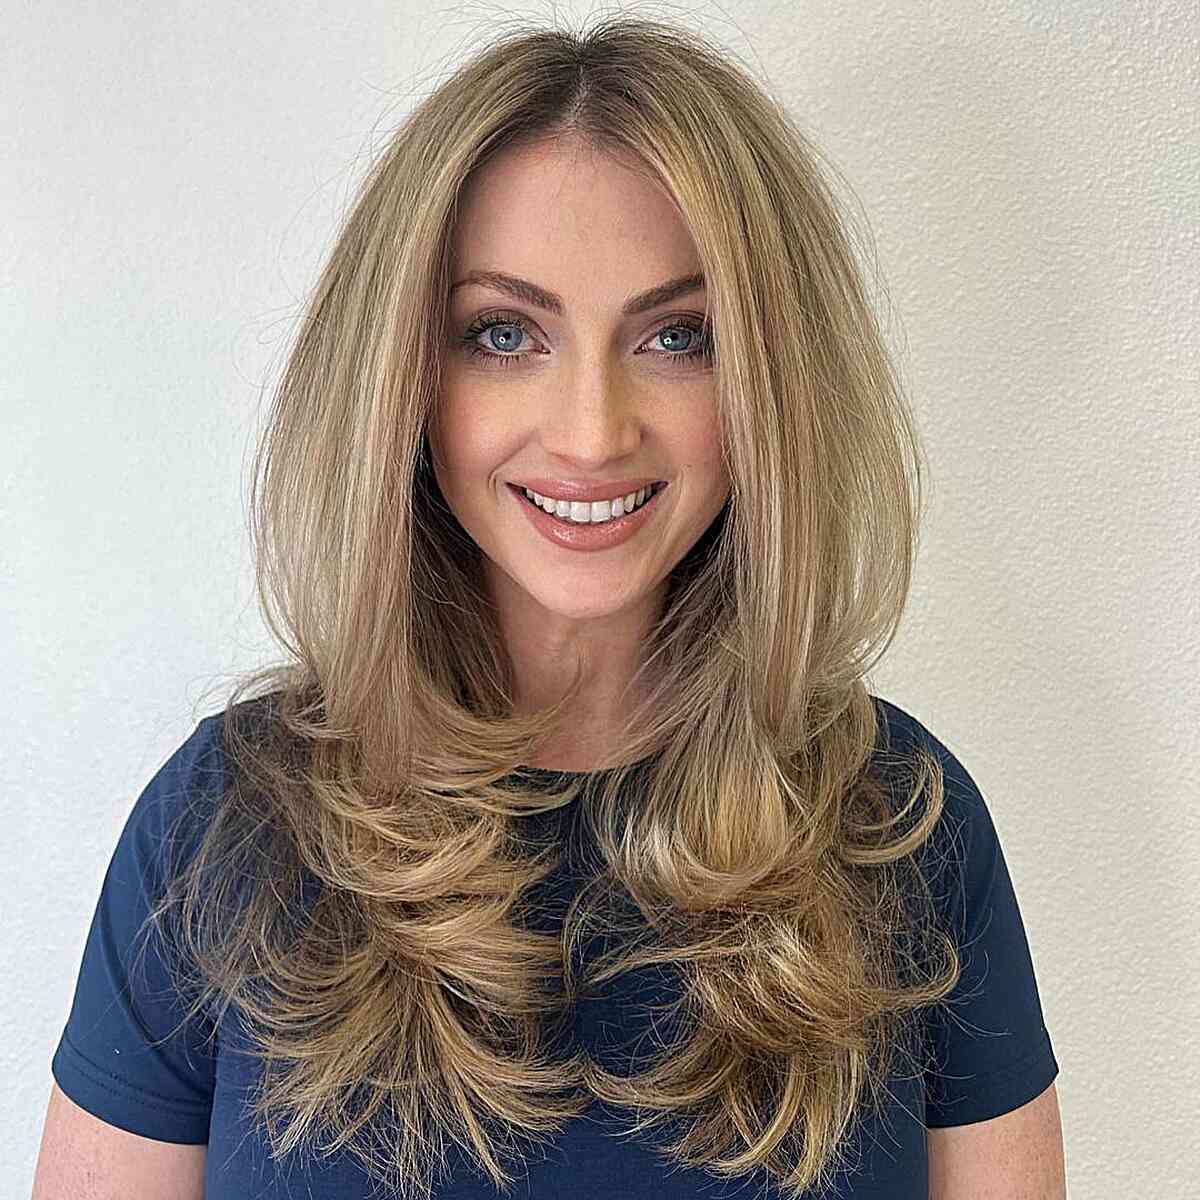 Octopus Cut Long Blonde Hair with a Center Part Long Blonde Hair with a Center Part and lots of layering at the ends for an oval face